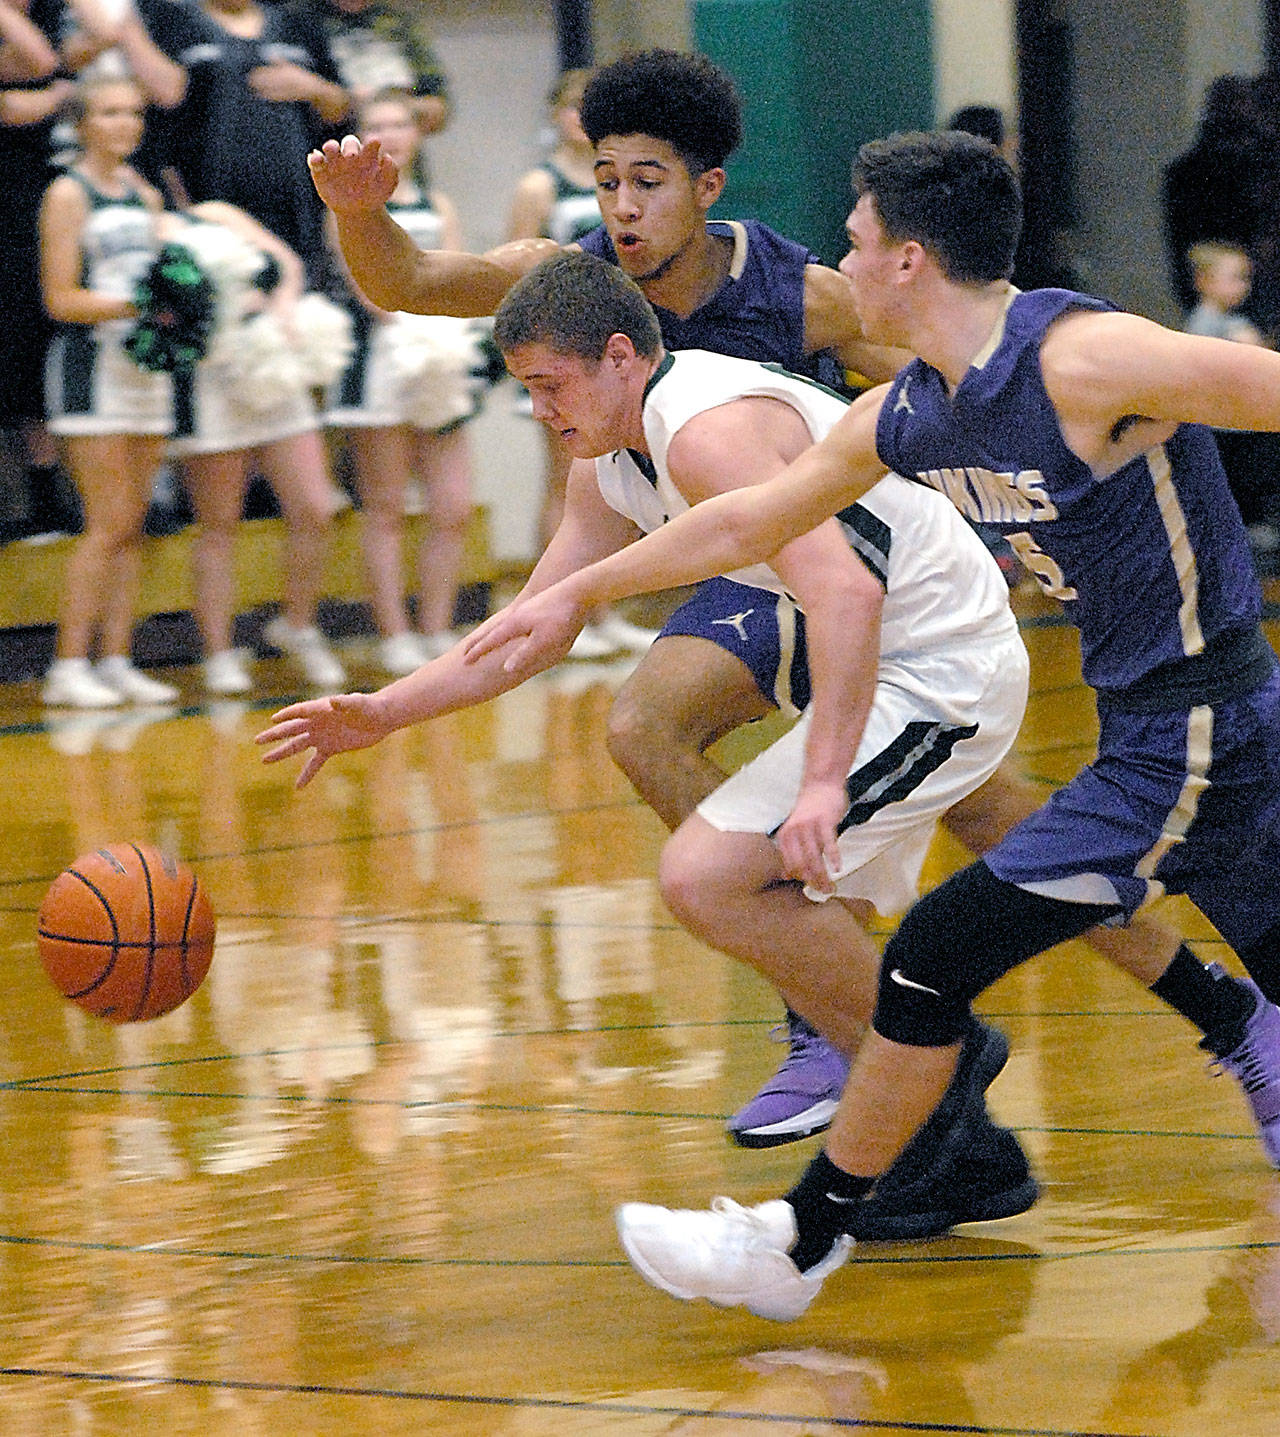 Port Angeles’ Easton Joslin, center, tries to outrun North Kitsap’s Kai Warren, left, and Ryan Hecker in the second quarter on Tuesday night at Port Angeles High School.                                Keith Thorpe/Peninsula Daily News